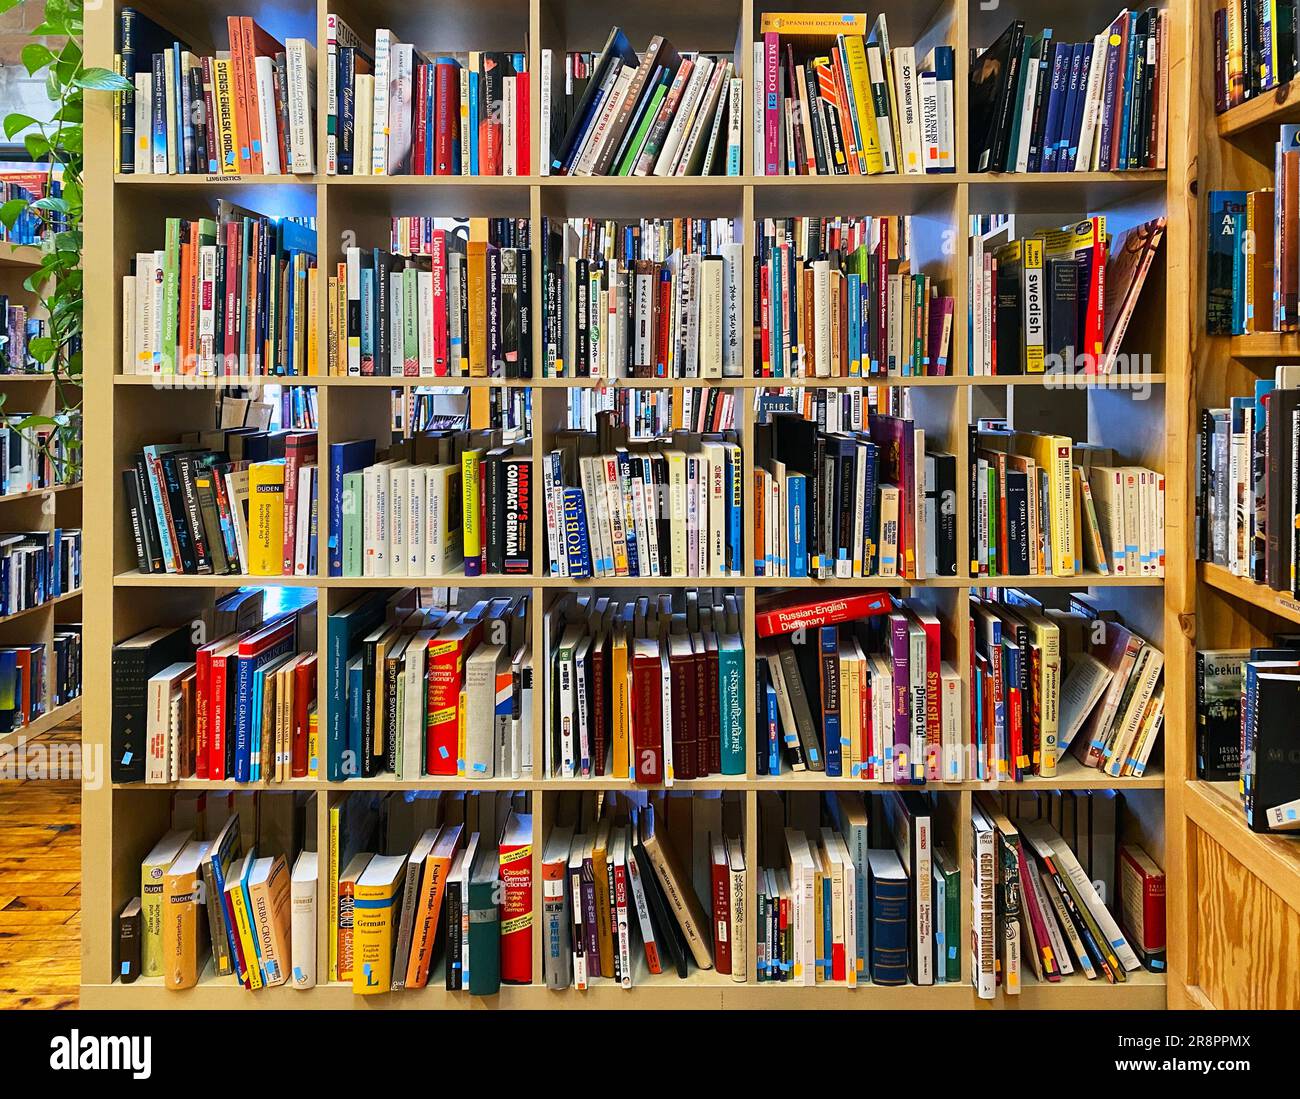 A bookshelf overflowing with books Stock Photo